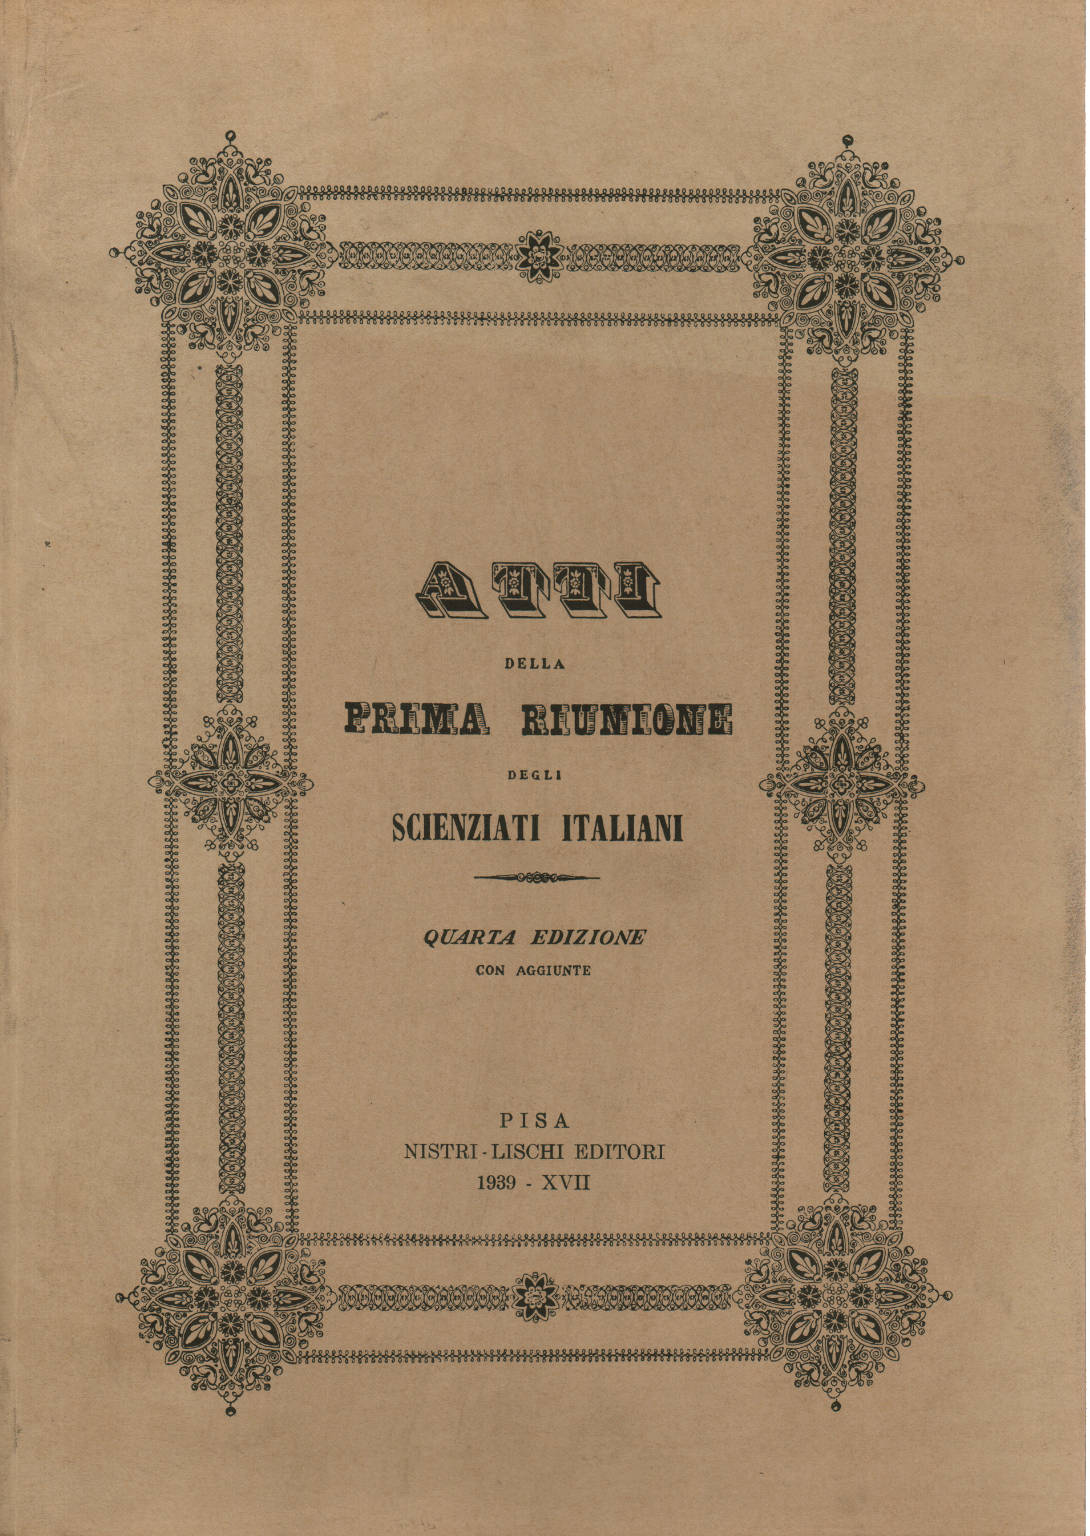 Proceedings of the first meeting of the scientists italian, AA.VV